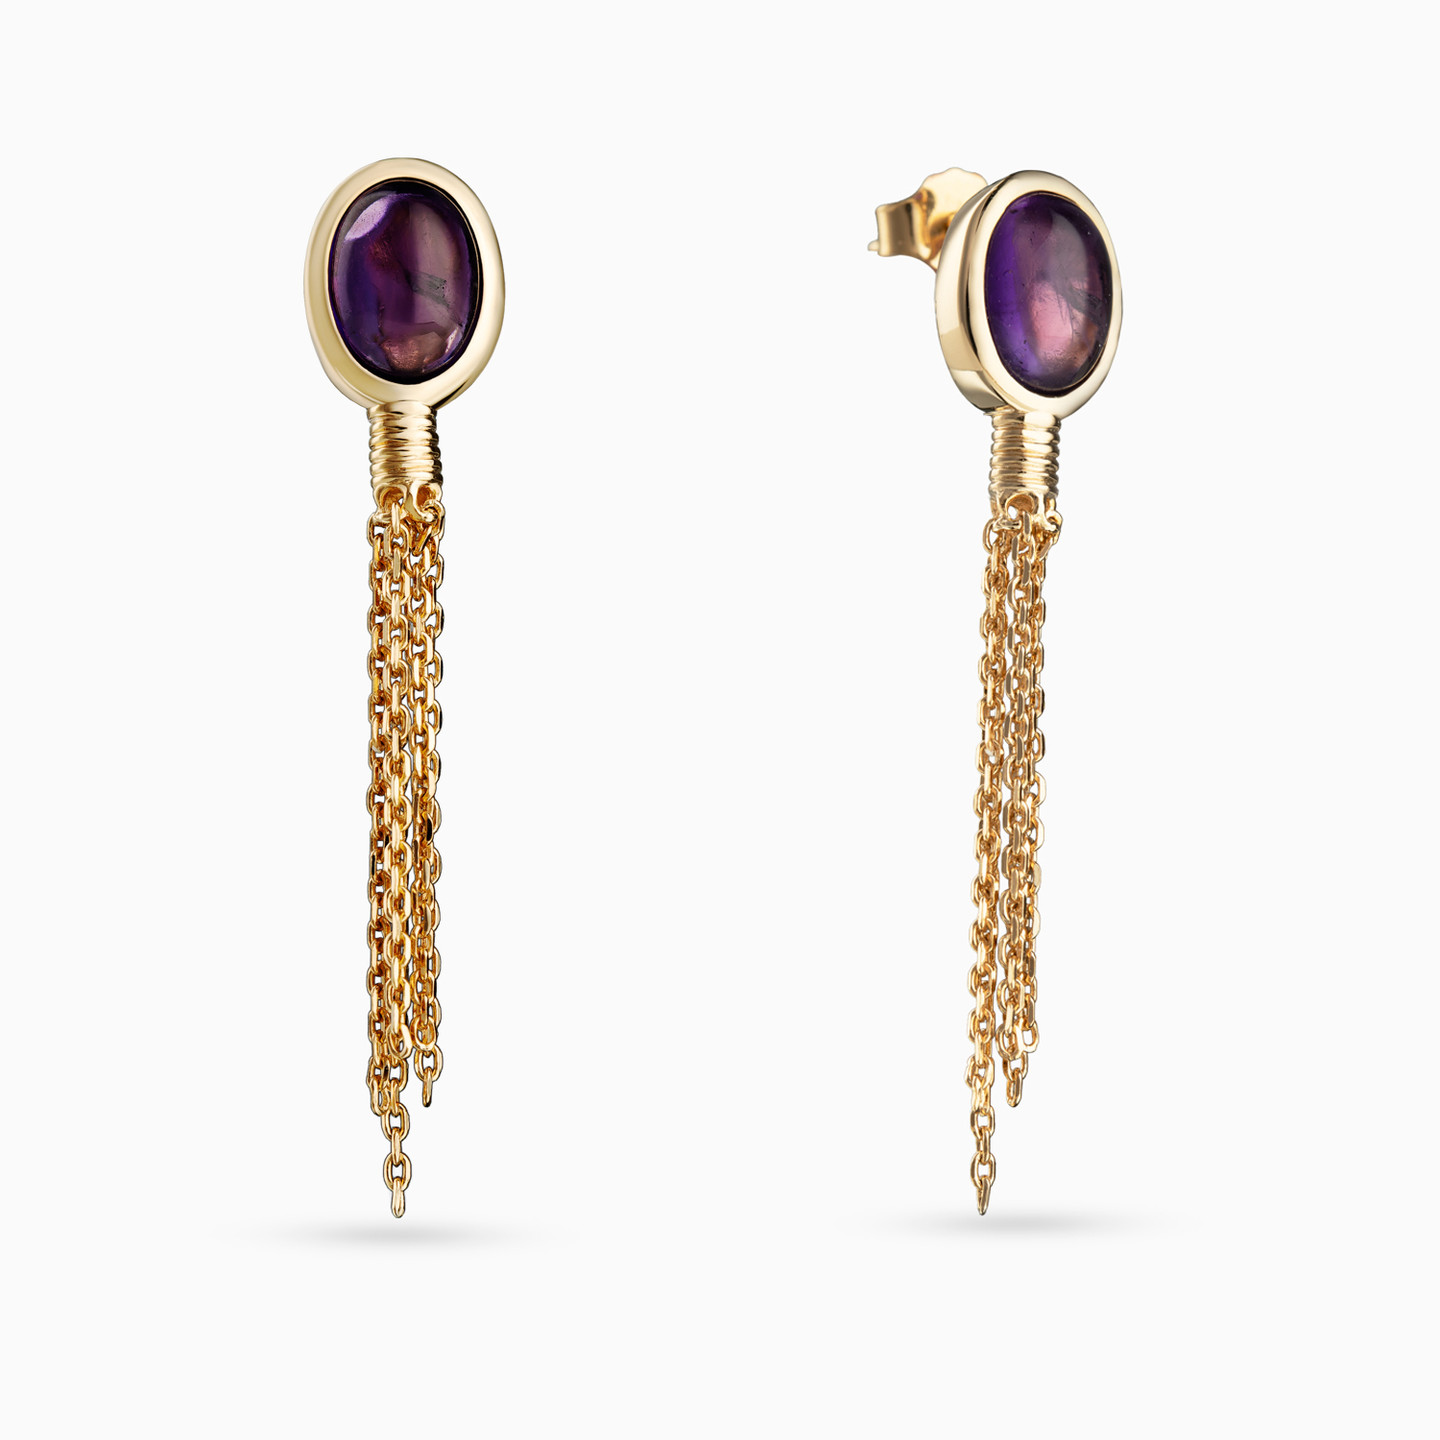 Gold Plated Colored Stones Drop Earrings - 2